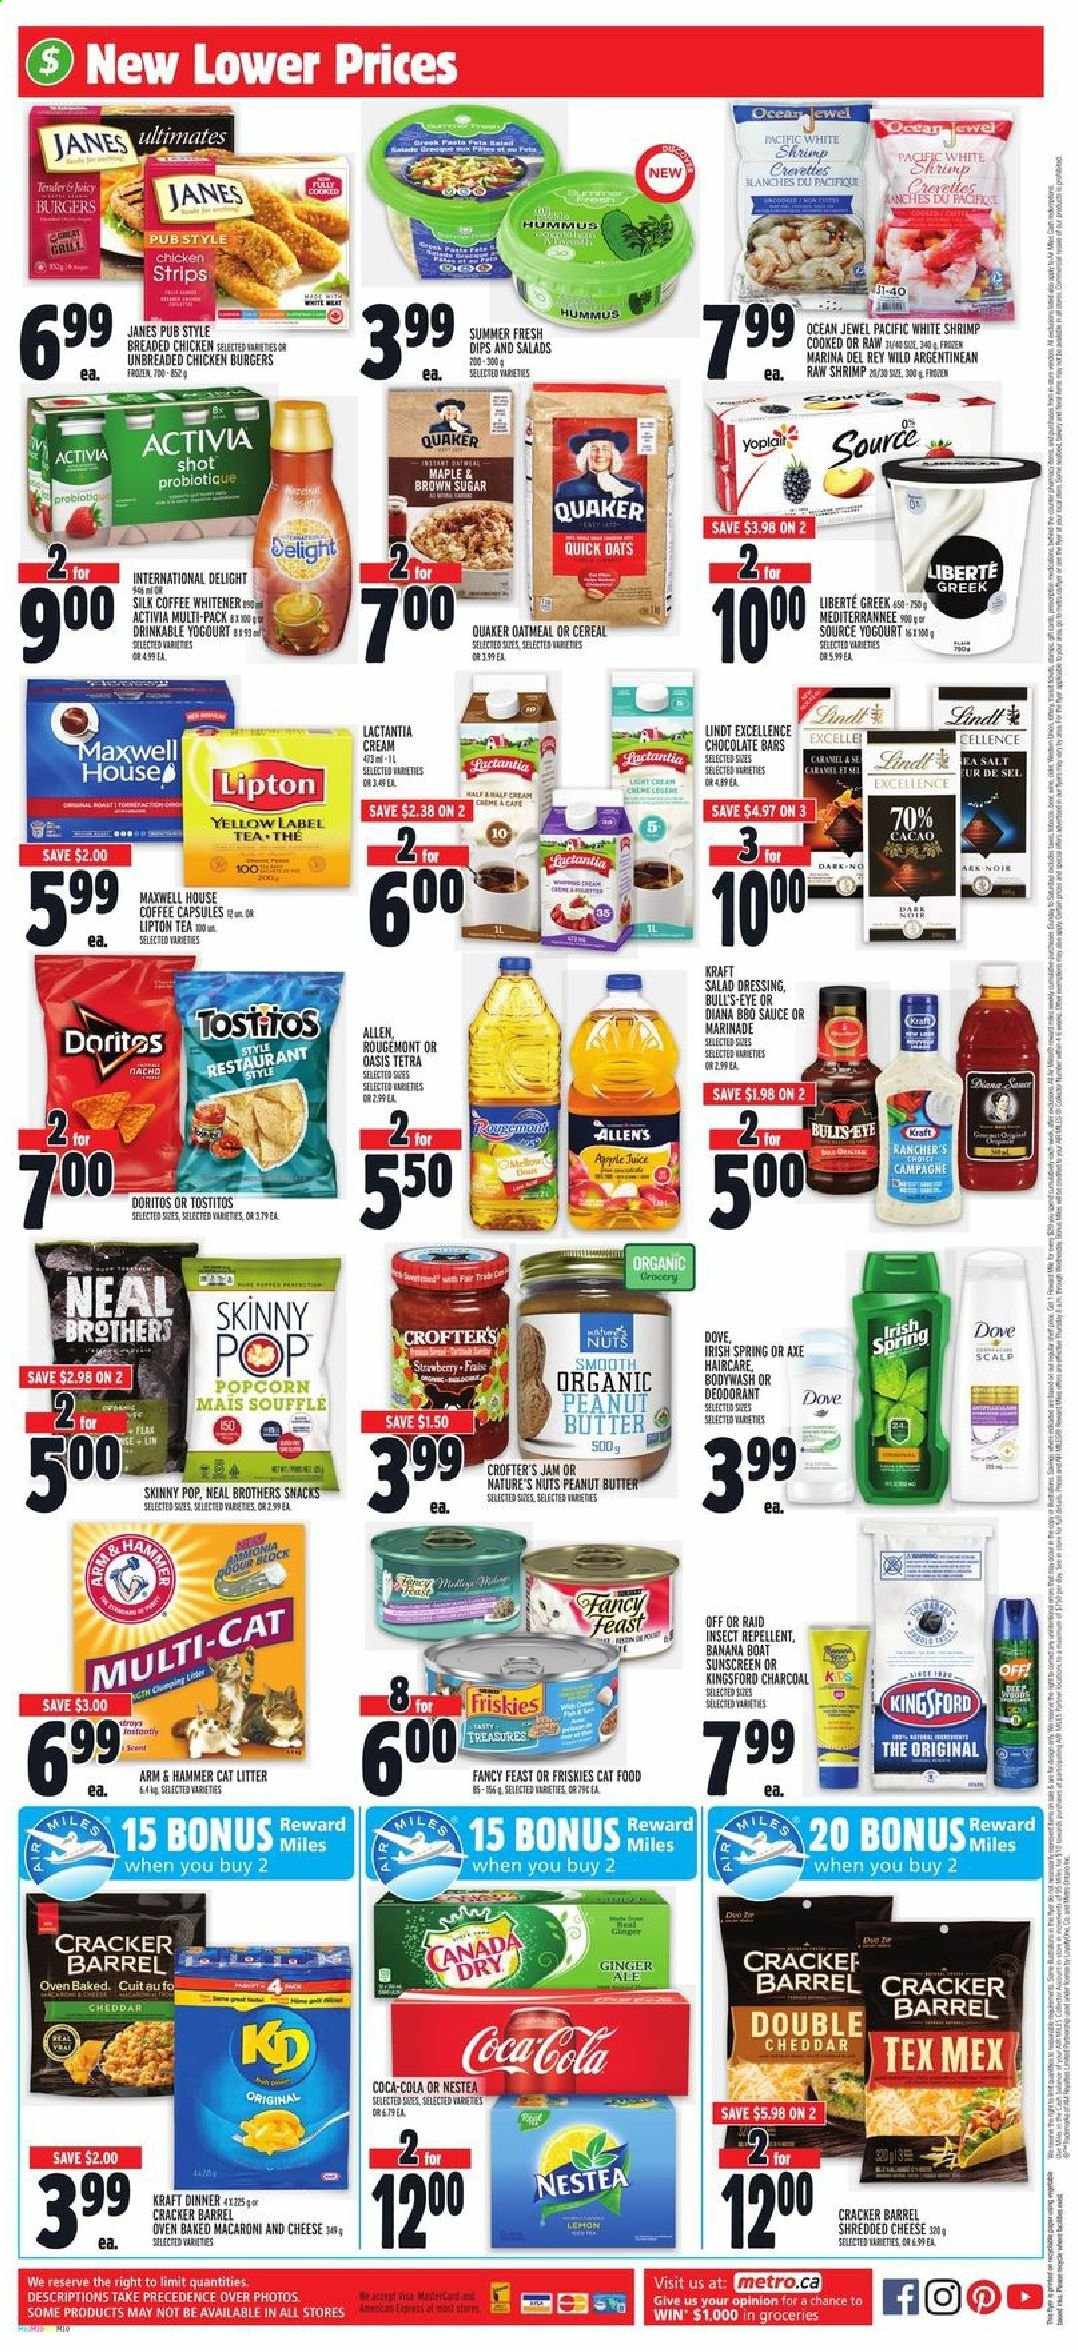 thumbnail - Metro Flyer - May 13, 2021 - May 19, 2021 - Sales products - shrimps, macaroni & cheese, hamburger, fried chicken, Quaker, Kraft®, hummus, shredded cheese, cheddar, Activia, Silk, strips, chicken strips, snack, crackers, chocolate bar, Doritos, popcorn, Tostitos, Skinny Pop, ARM & HAMMER, oatmeal, oats, Quick Oats, caramel, salad dressing, dressing, marinade, fruit jam, peanut butter, Canada Dry, Coca-Cola, ginger ale, Maxwell House, tea, coffee, coffee capsules, BROTHERS, anti-perspirant, repellent, Raid, cat litter, animal food, cat food, Fancy Feast, Friskies, deodorant. Page 13.